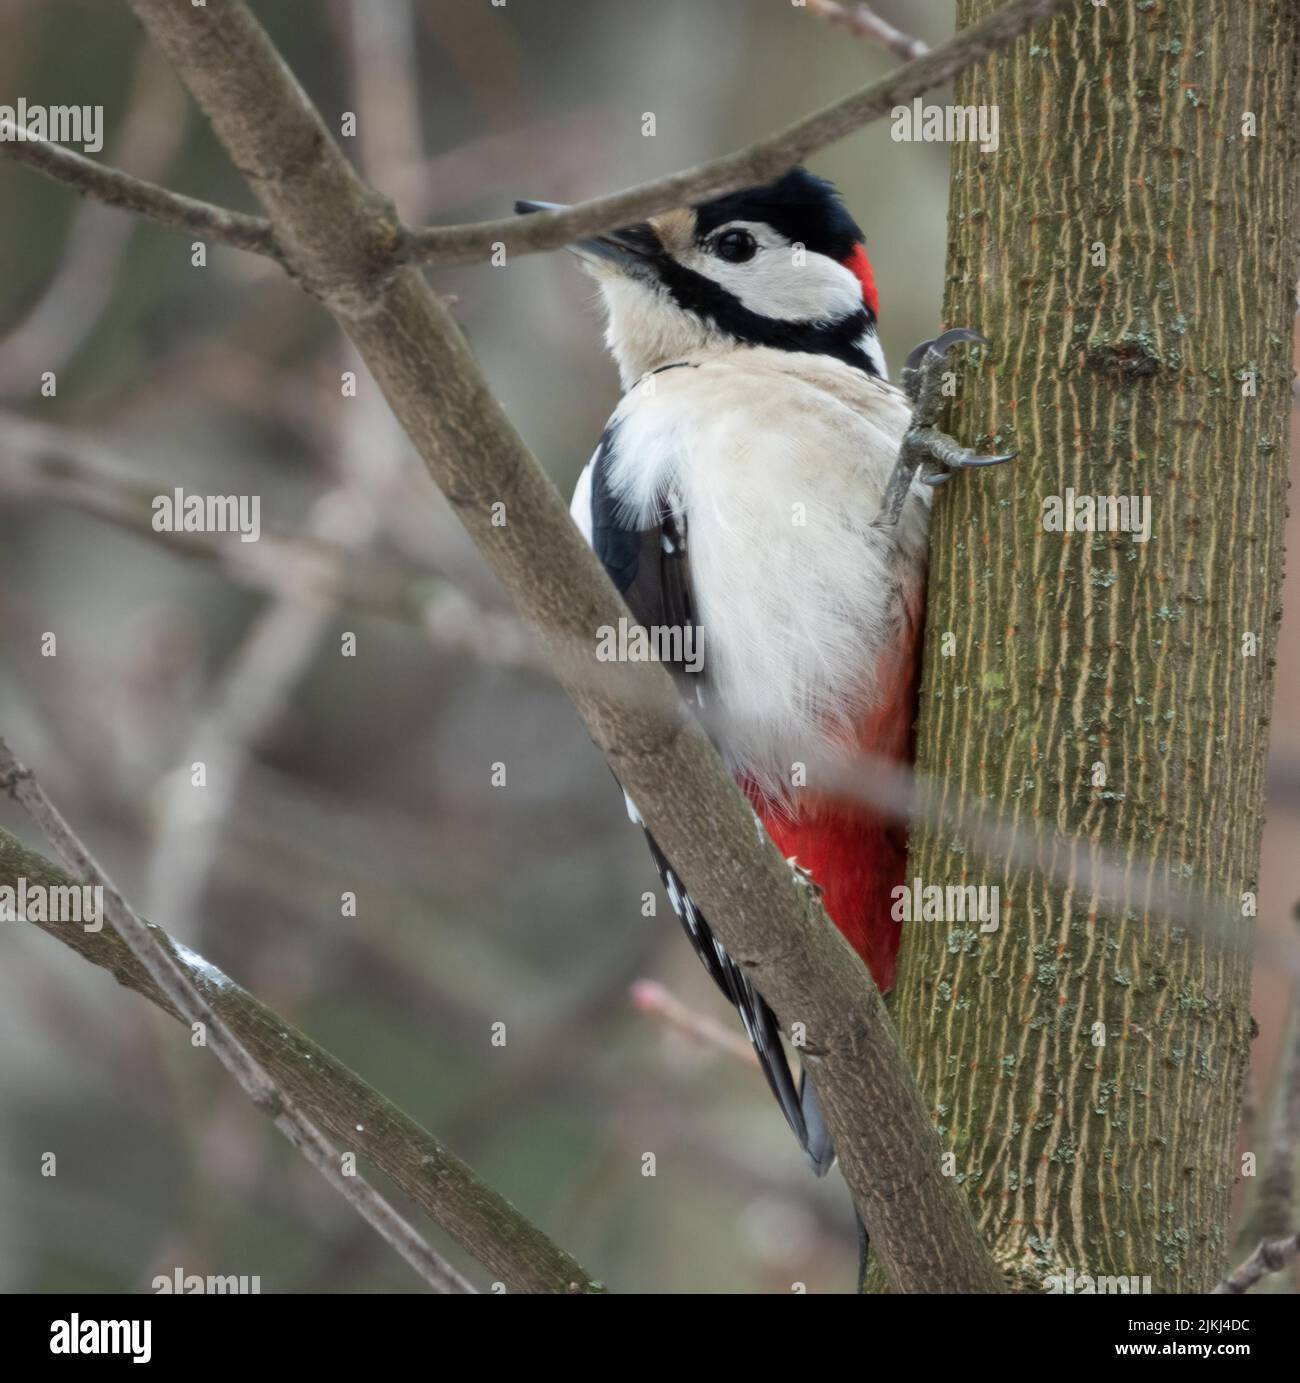 A Great spotted woodpecker (Dendrocopos major) bird on a tree Stock Photo